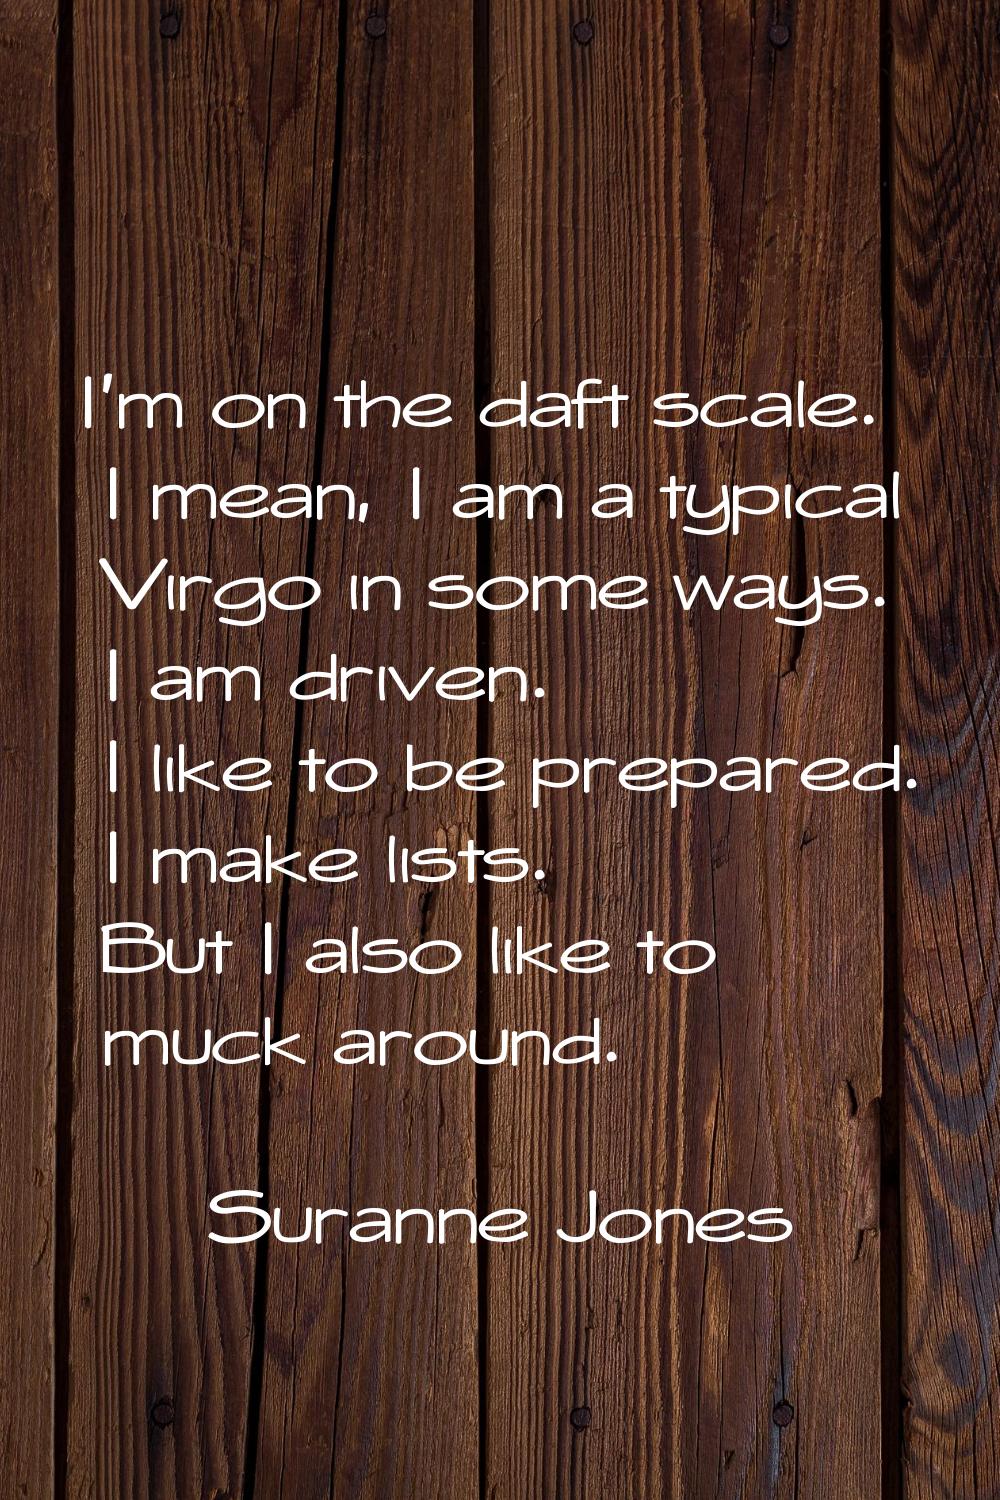 I'm on the daft scale. I mean, I am a typical Virgo in some ways. I am driven. I like to be prepare